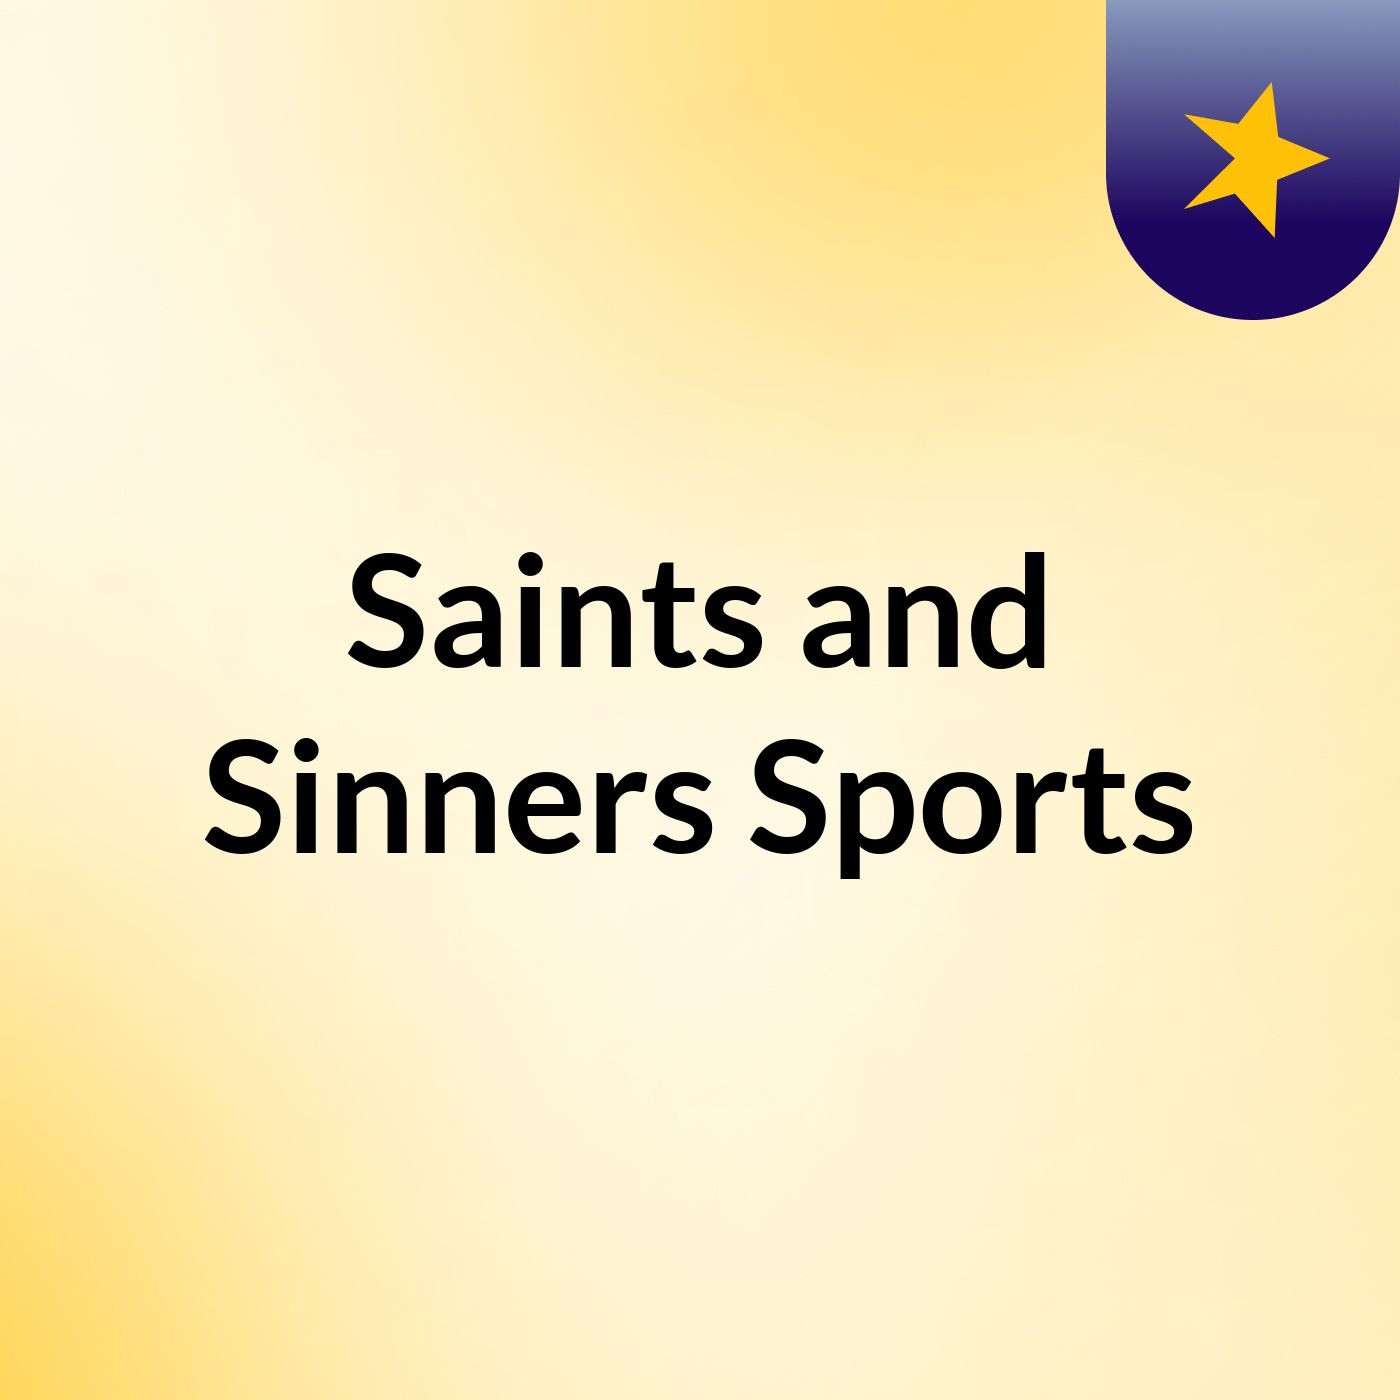 Saints and Sinners Sports